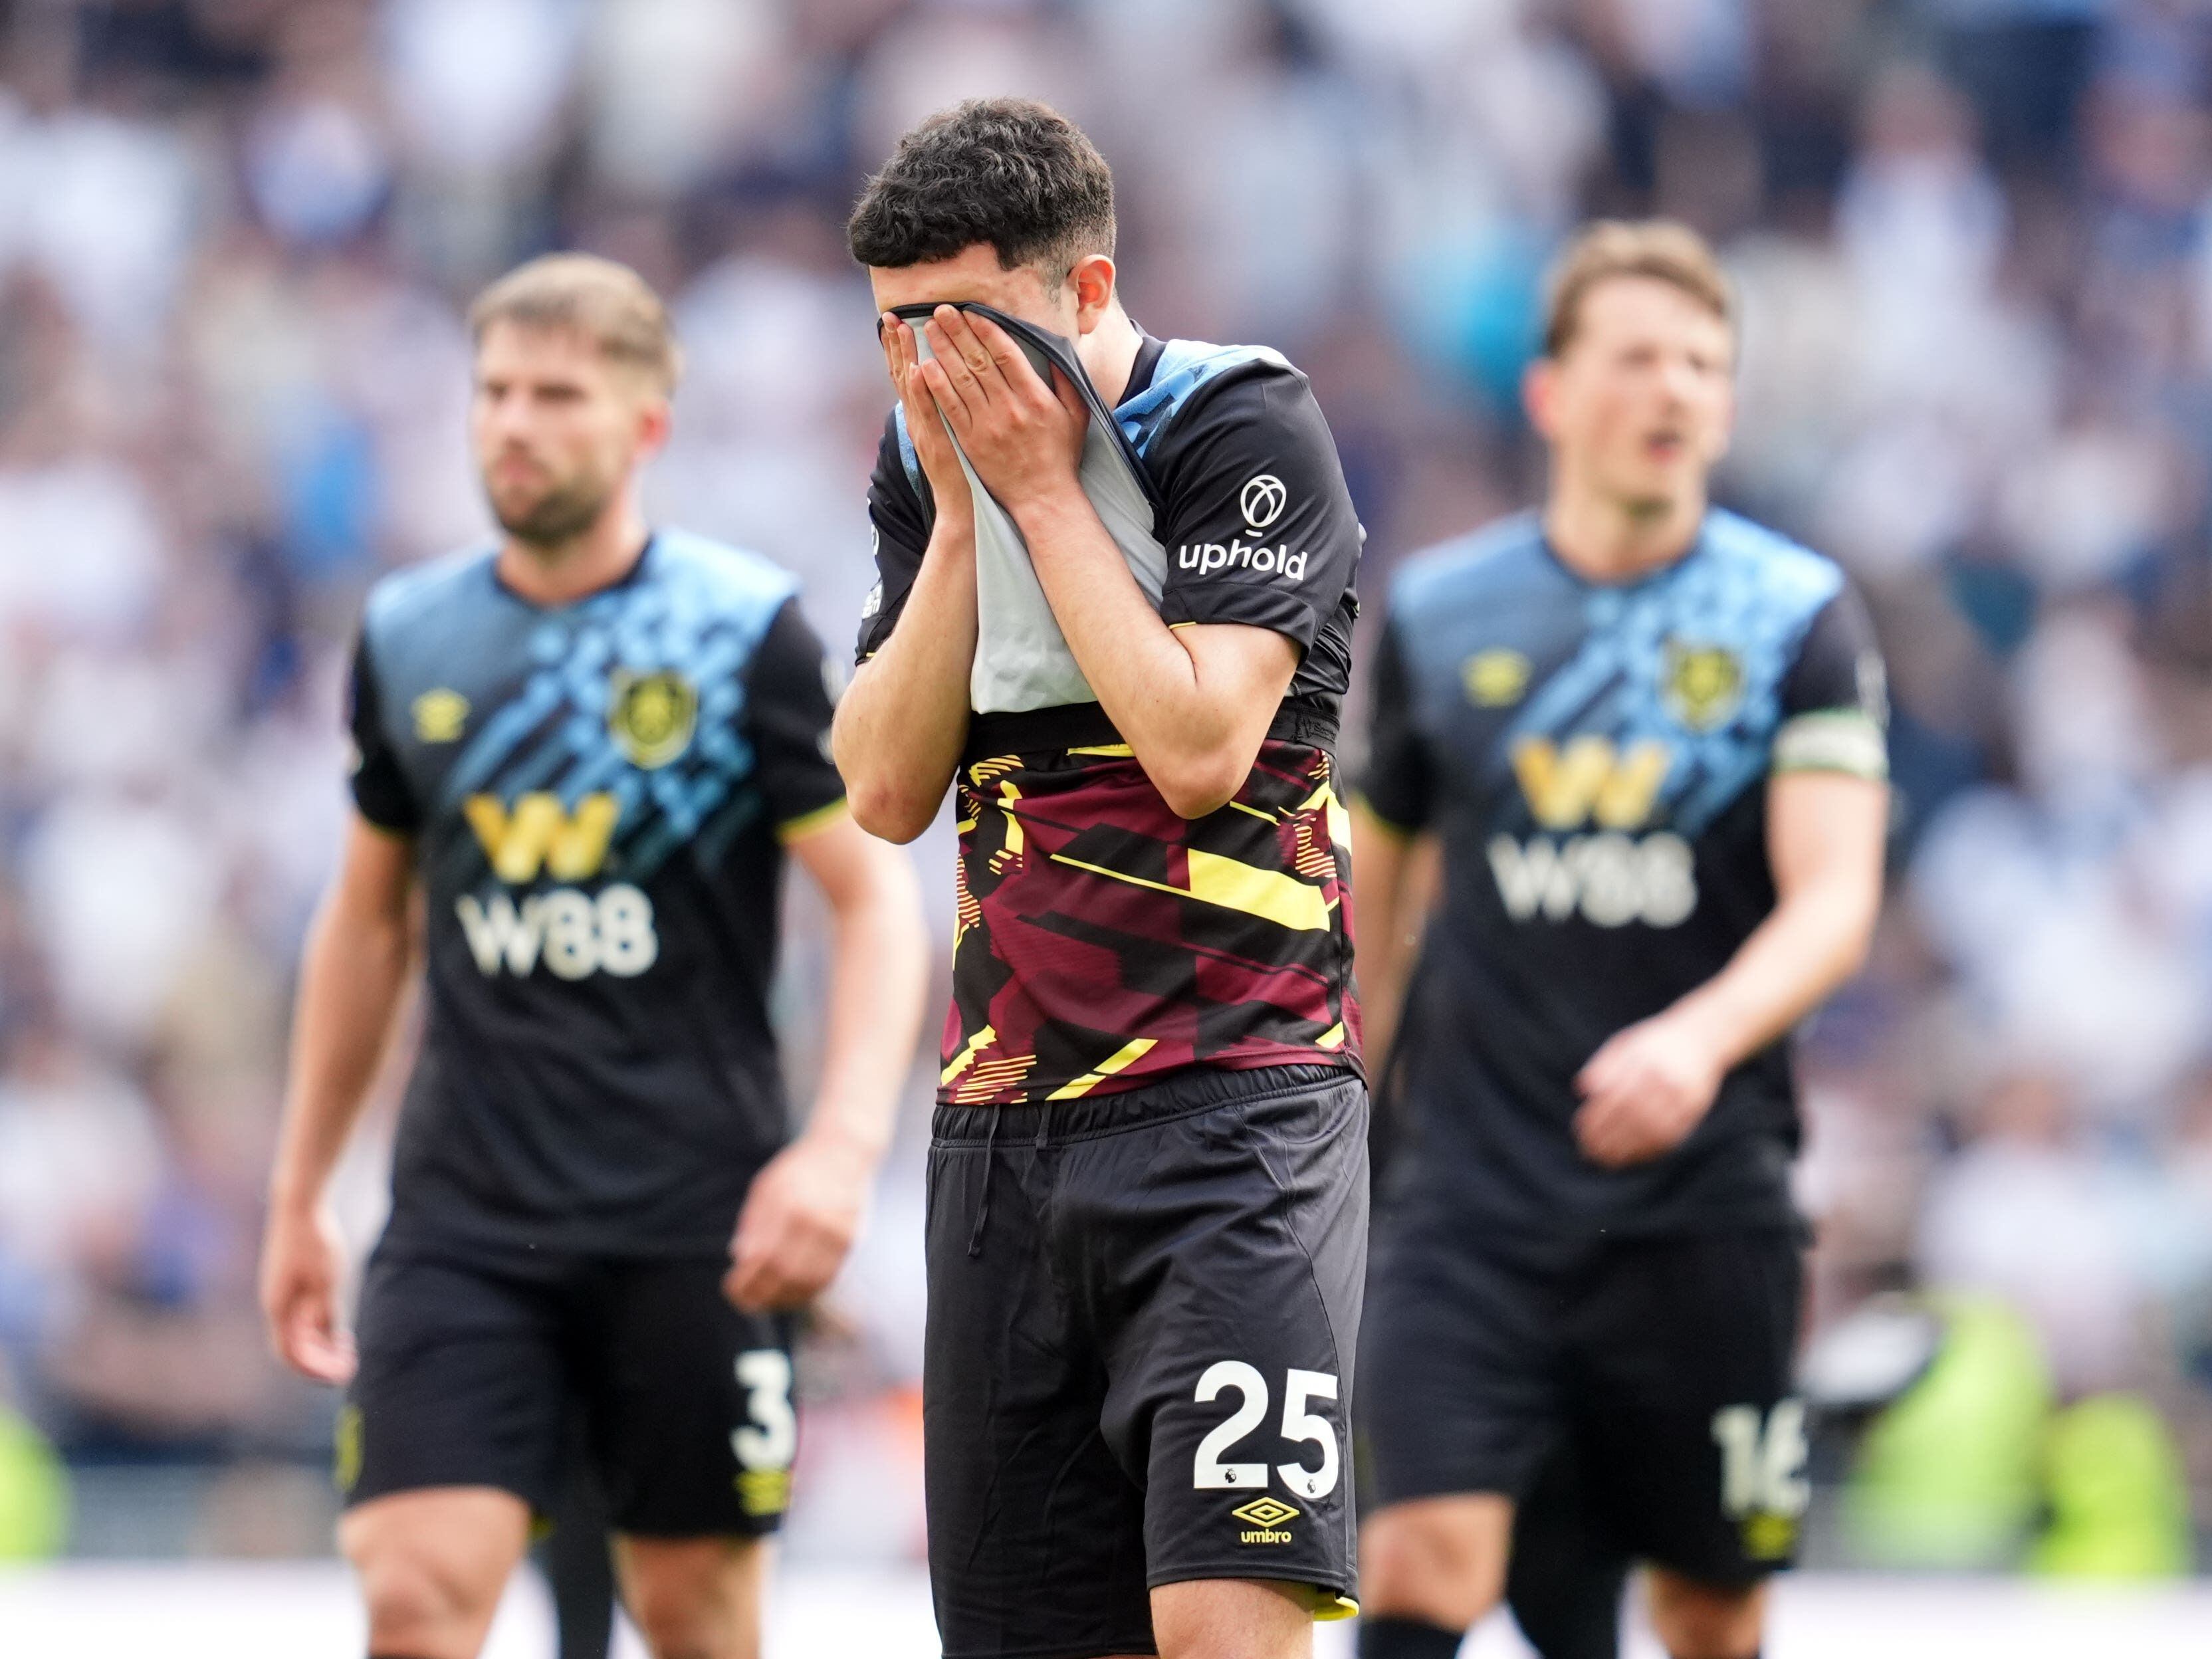 Burnley relegated after Tottenham fight back to claim victory